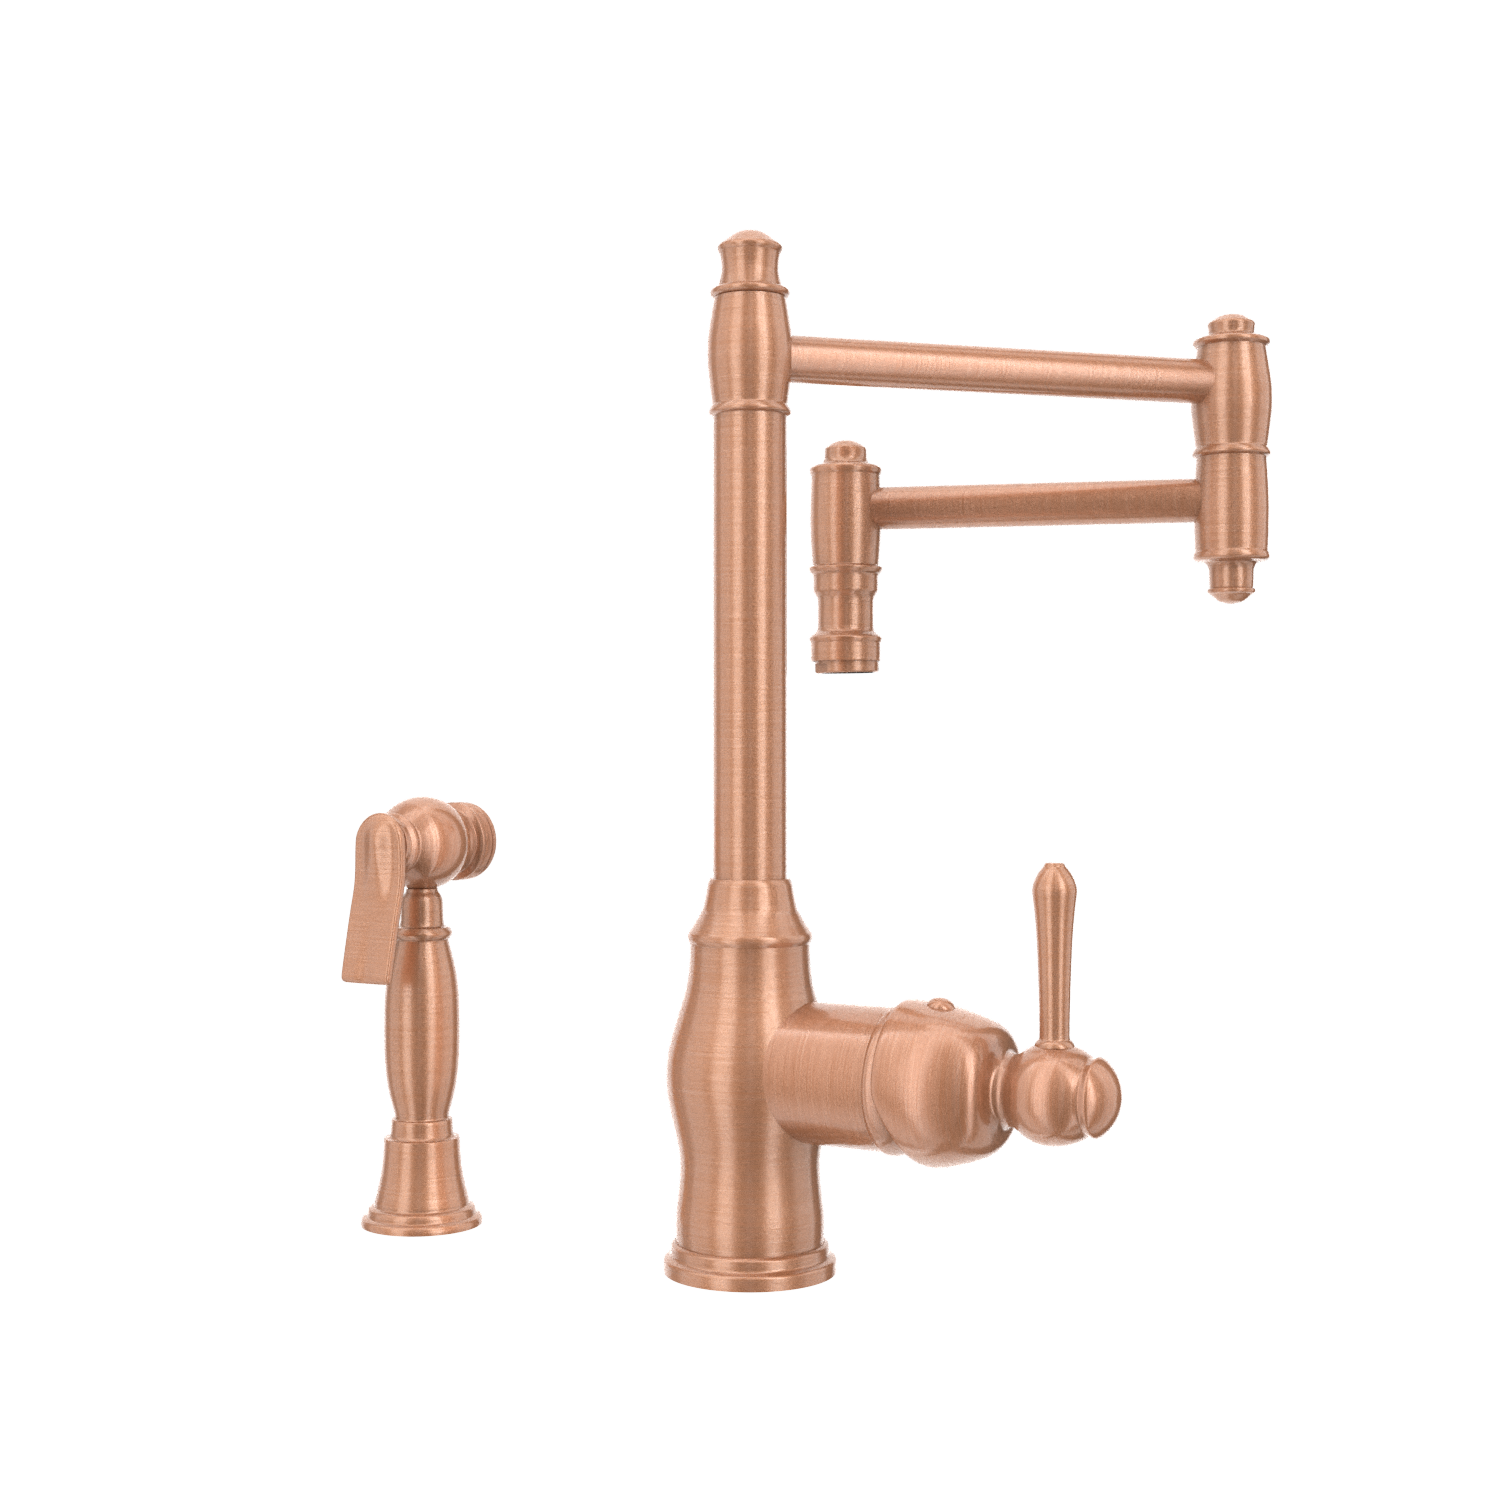 One-Handle Copper Pot Filler Kitchen Faucet with Side Sprayer - AK96918P2